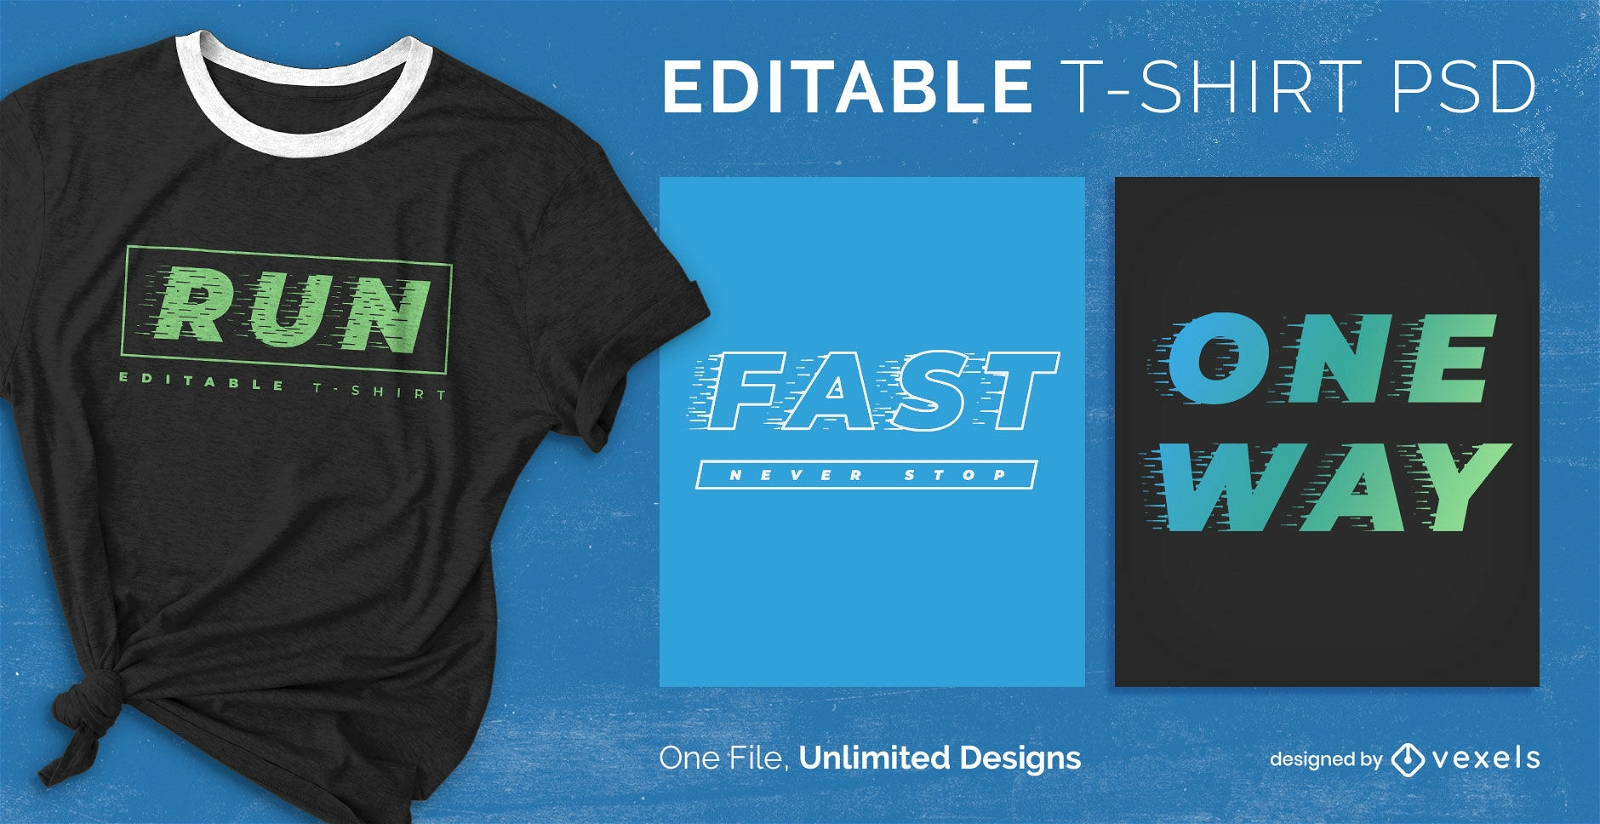 Movement effect scalable t-shirt psd